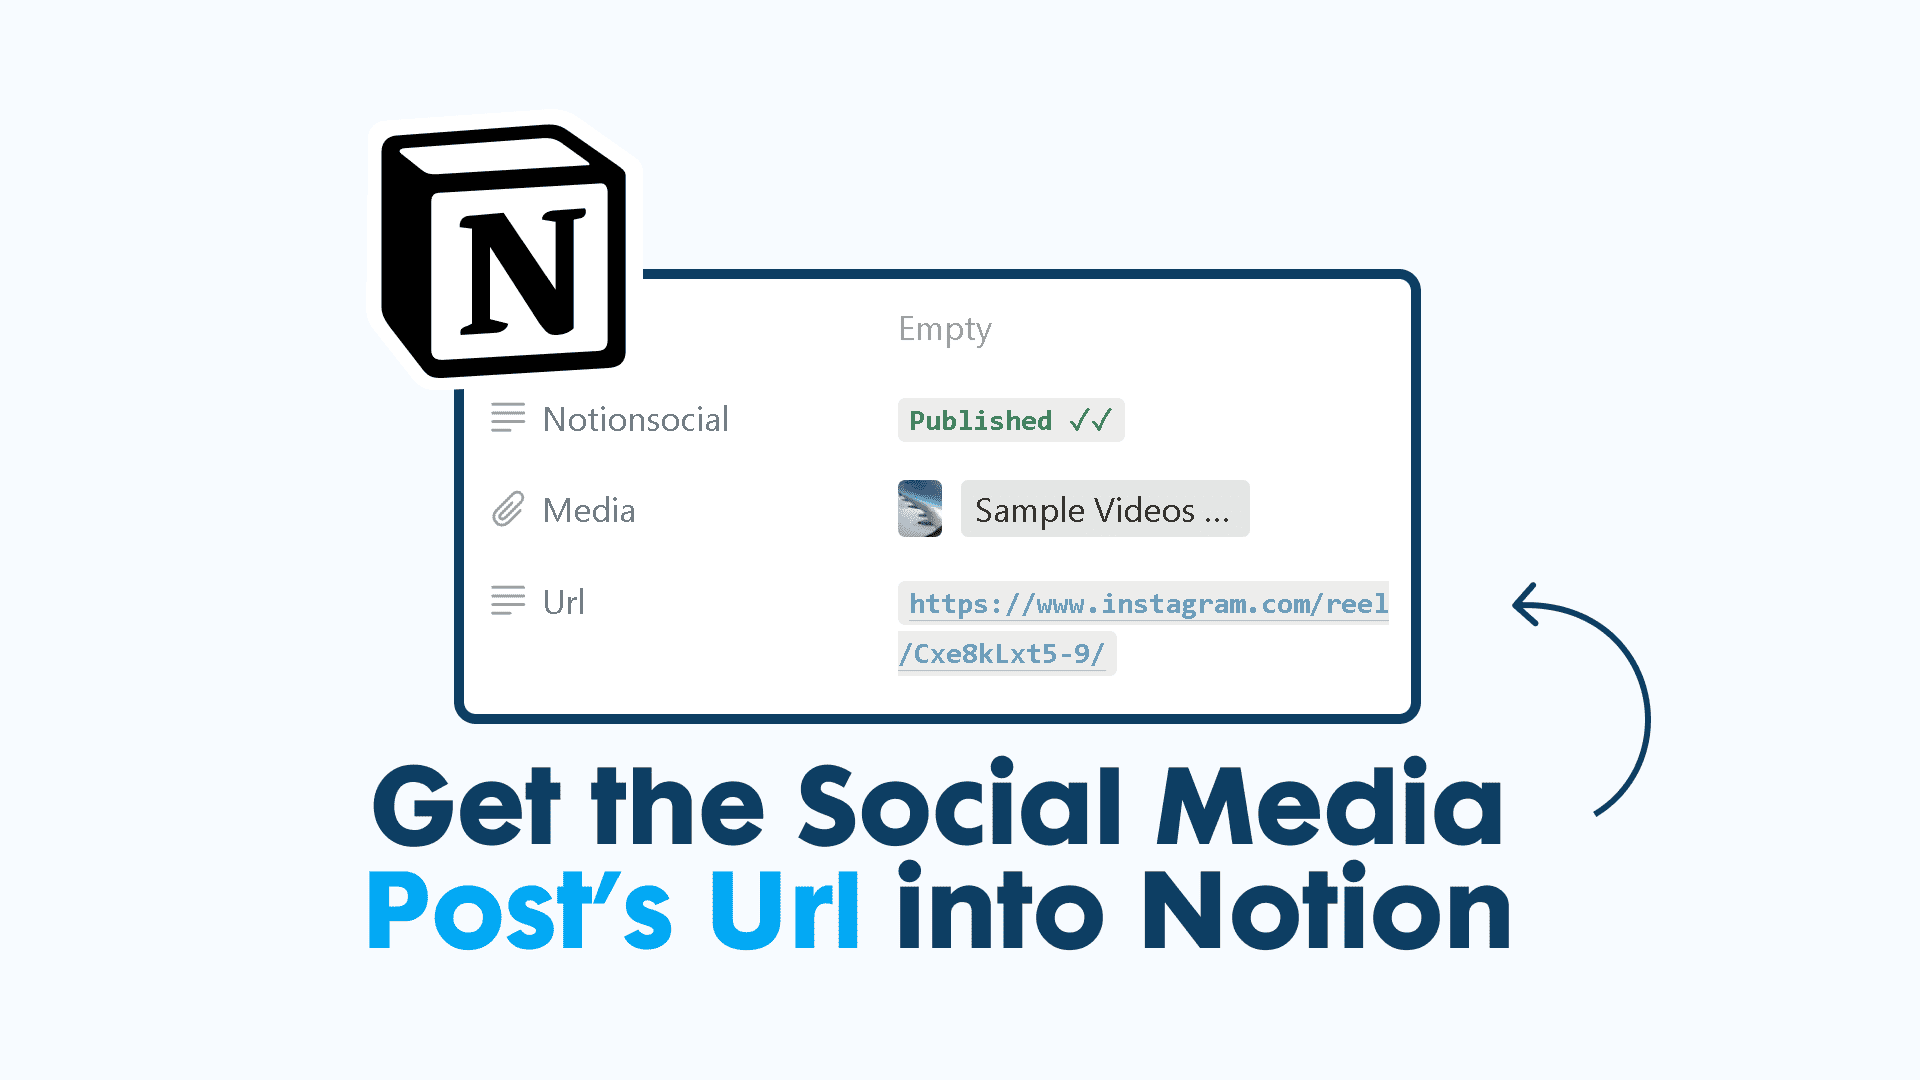 How to get the Social Media Post's URL back in Notion?